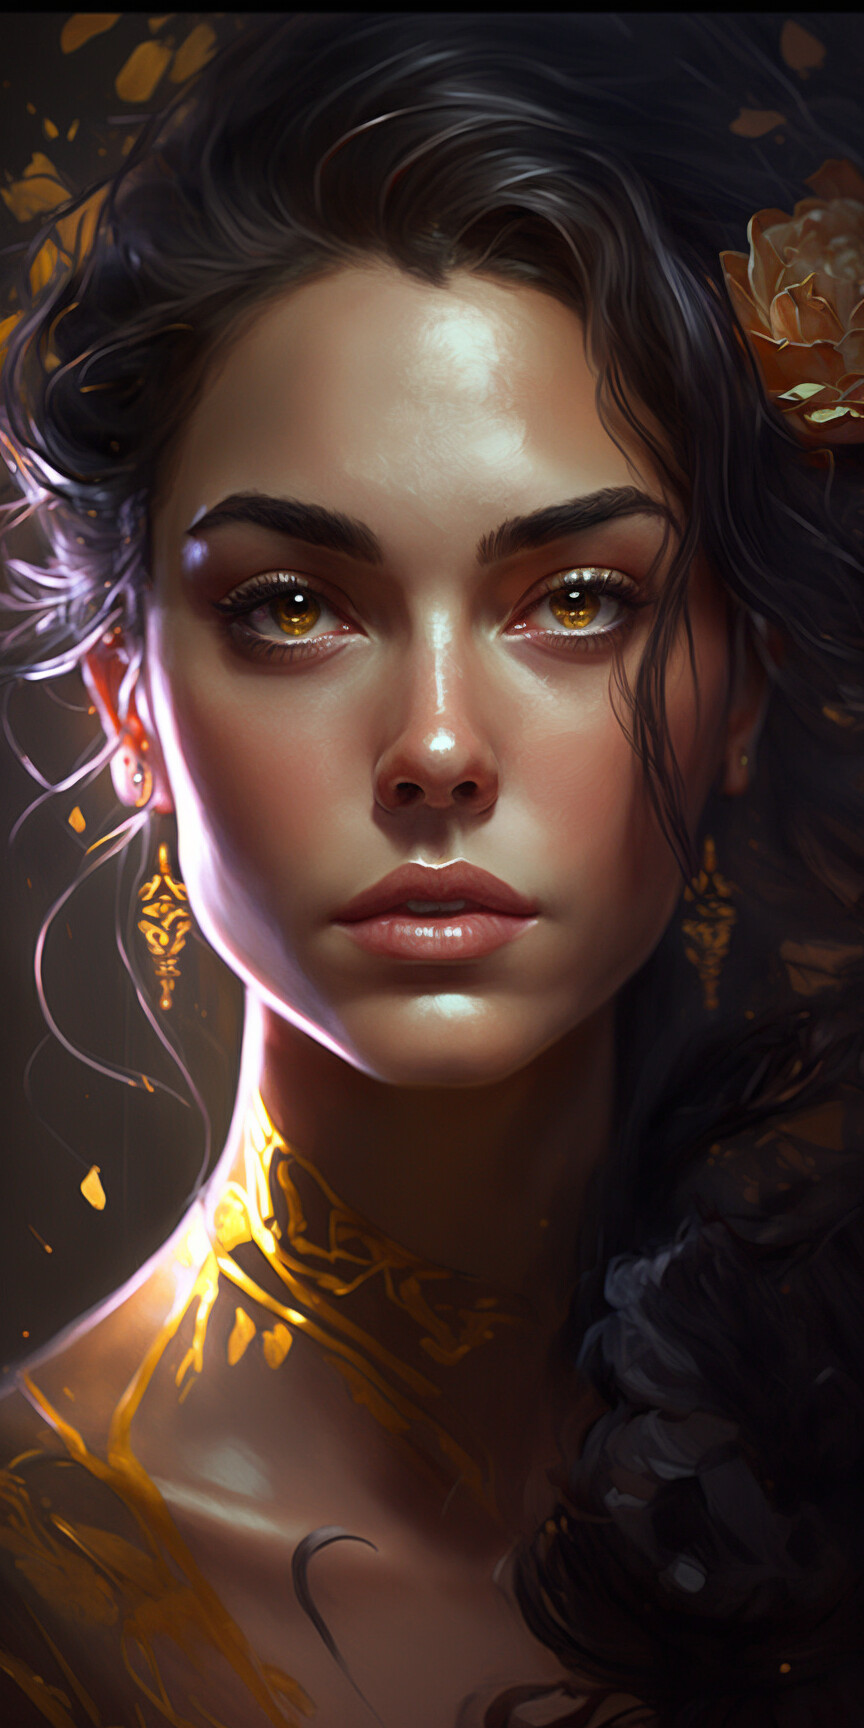 ArtStation - Beautiful woman: SERIES : LIMITED COLLECTION | Artworks